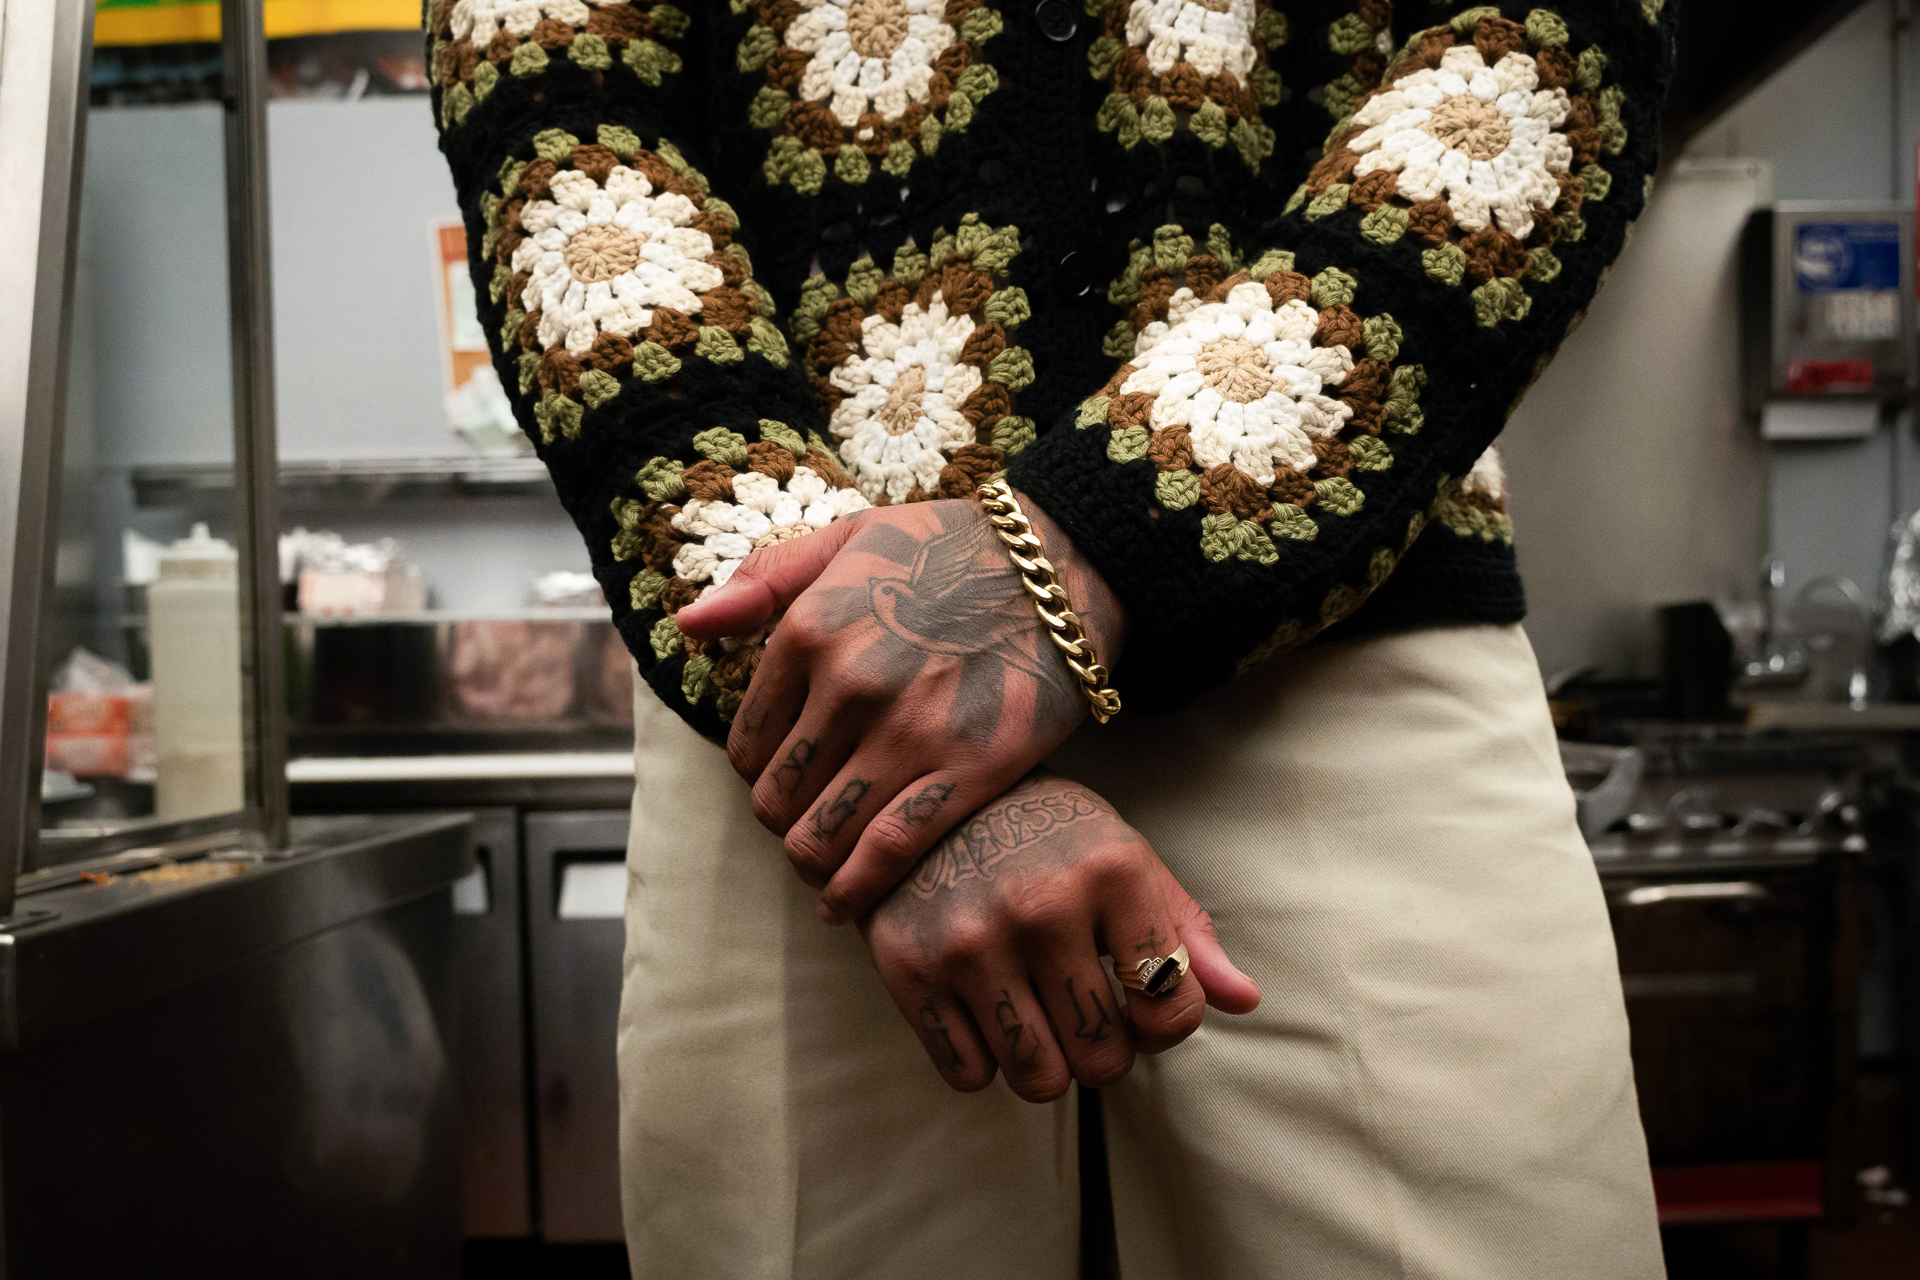 A person crosses their arms in front of their body with one hand holding their wrist. A gold bracelet hands from their wrist and tattoos cover their hands. They are wearing a knit shirt and off white pants.